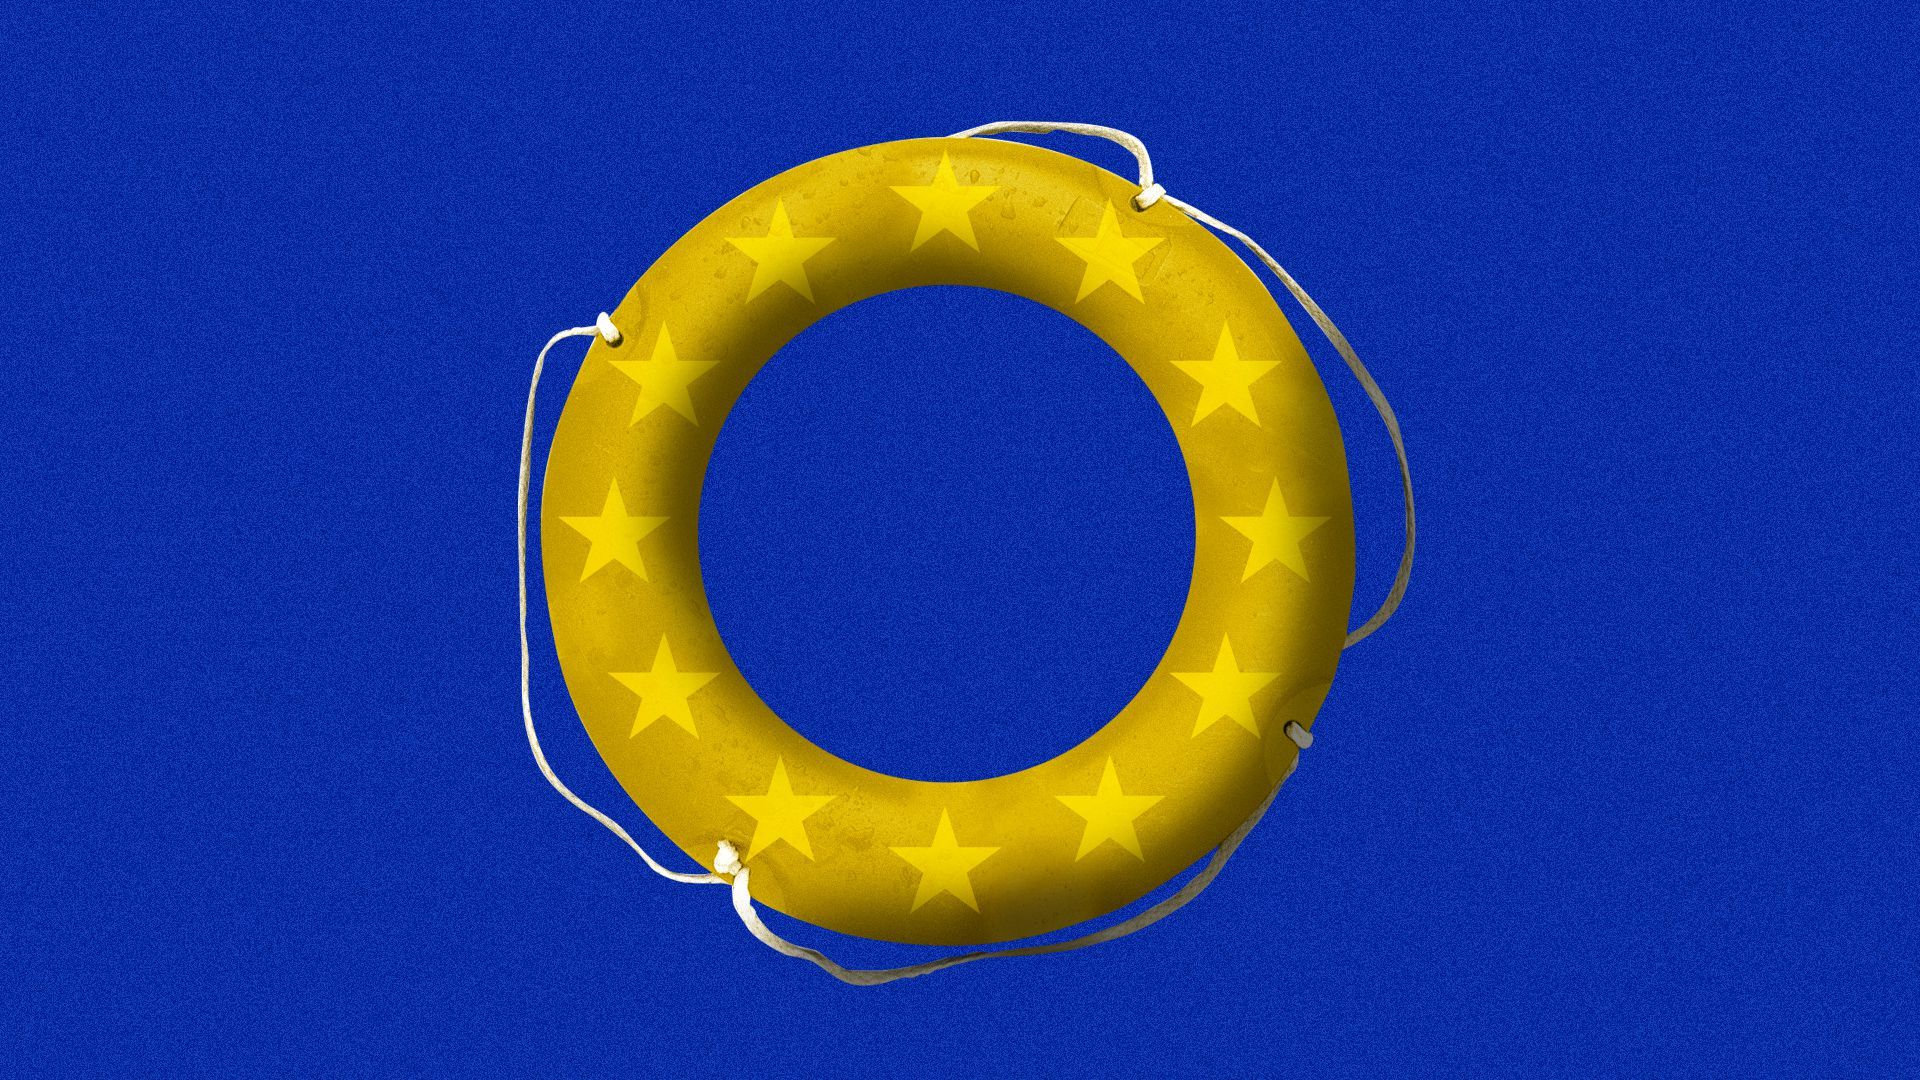 Illustration of a life preserver integrated with the stars on the EU flag.